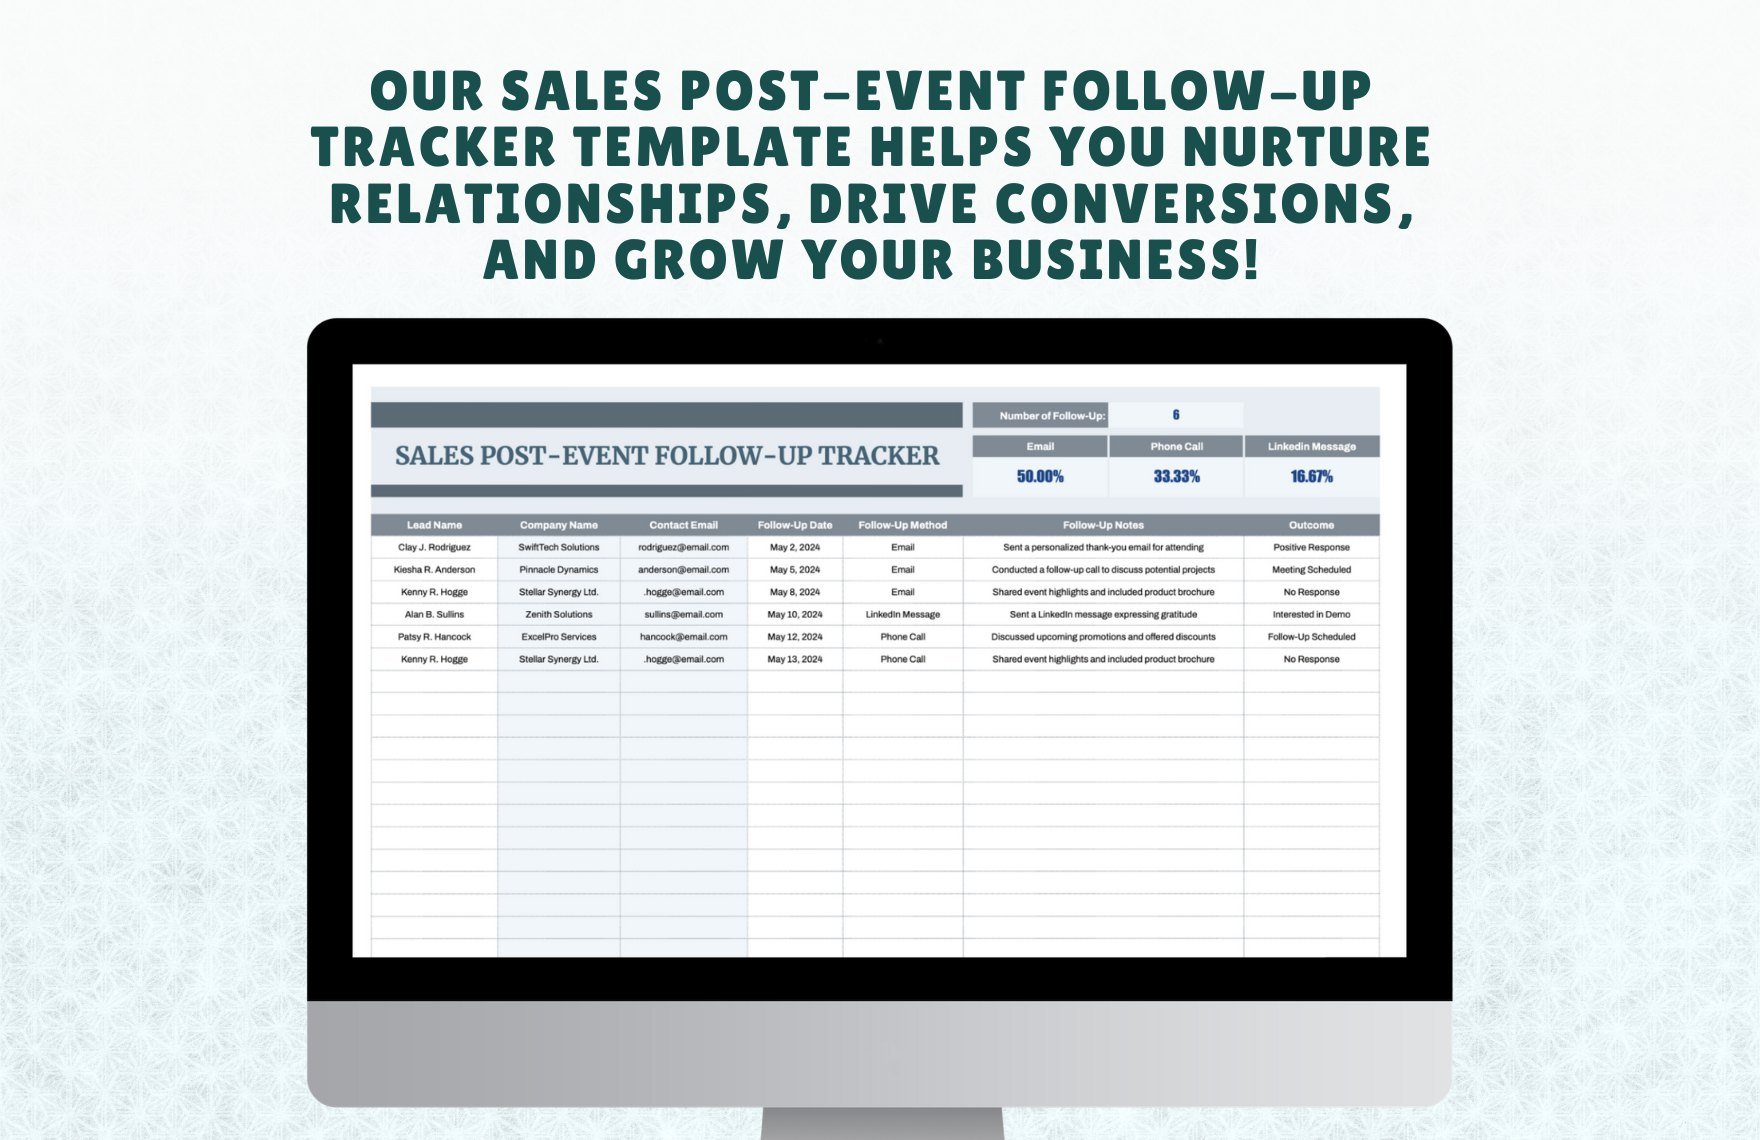 Sales Post-Event Follow-Up Tracker Template